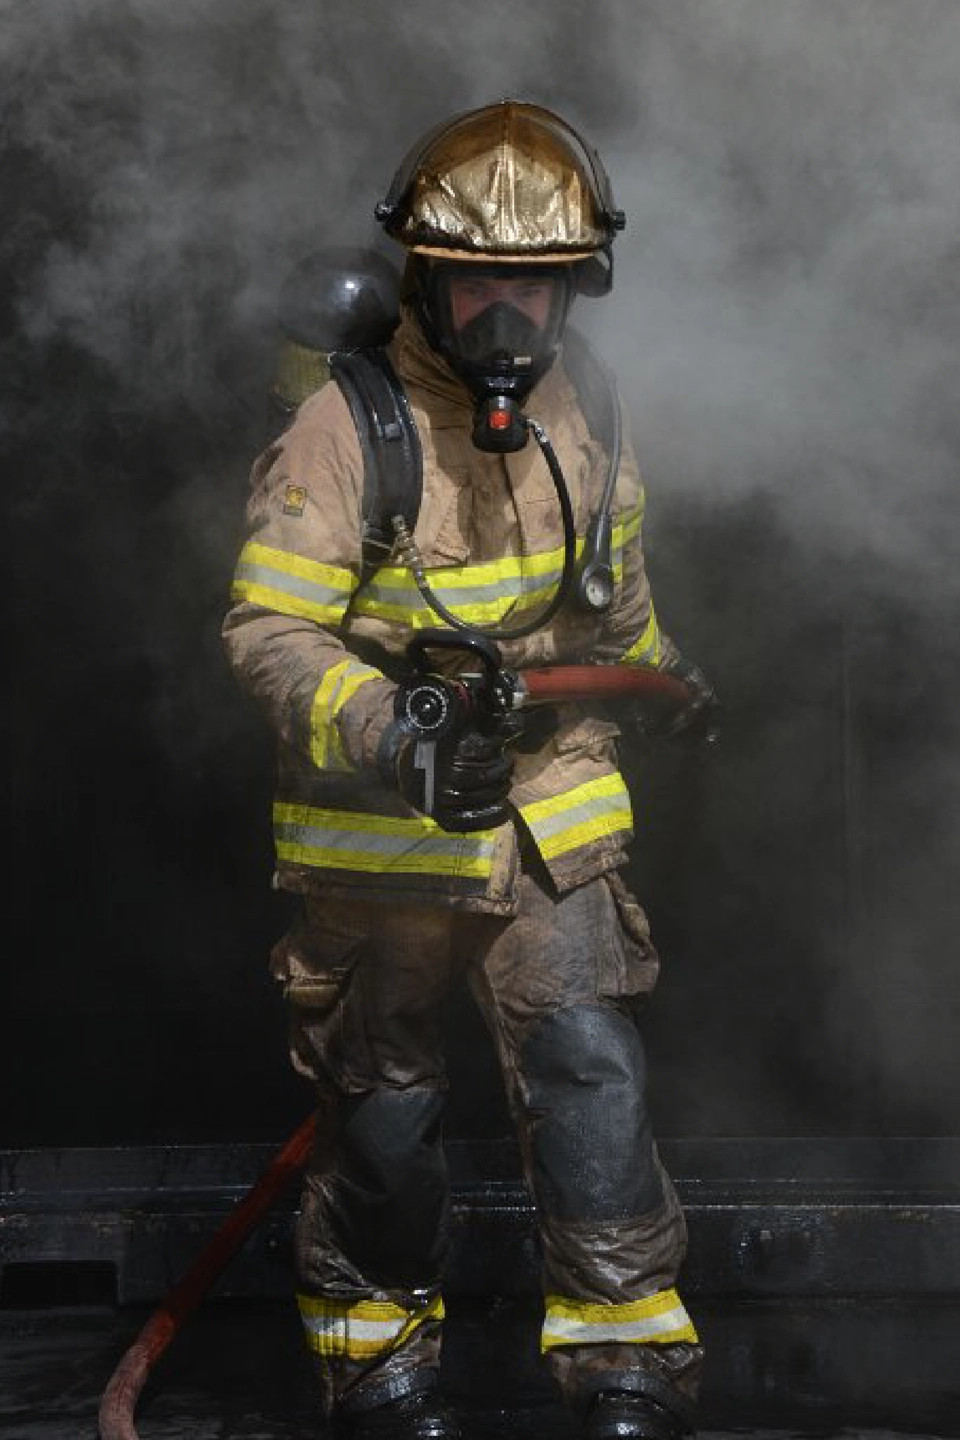 South Australian Country Fire Service (SACFS) - photography of a firefighter